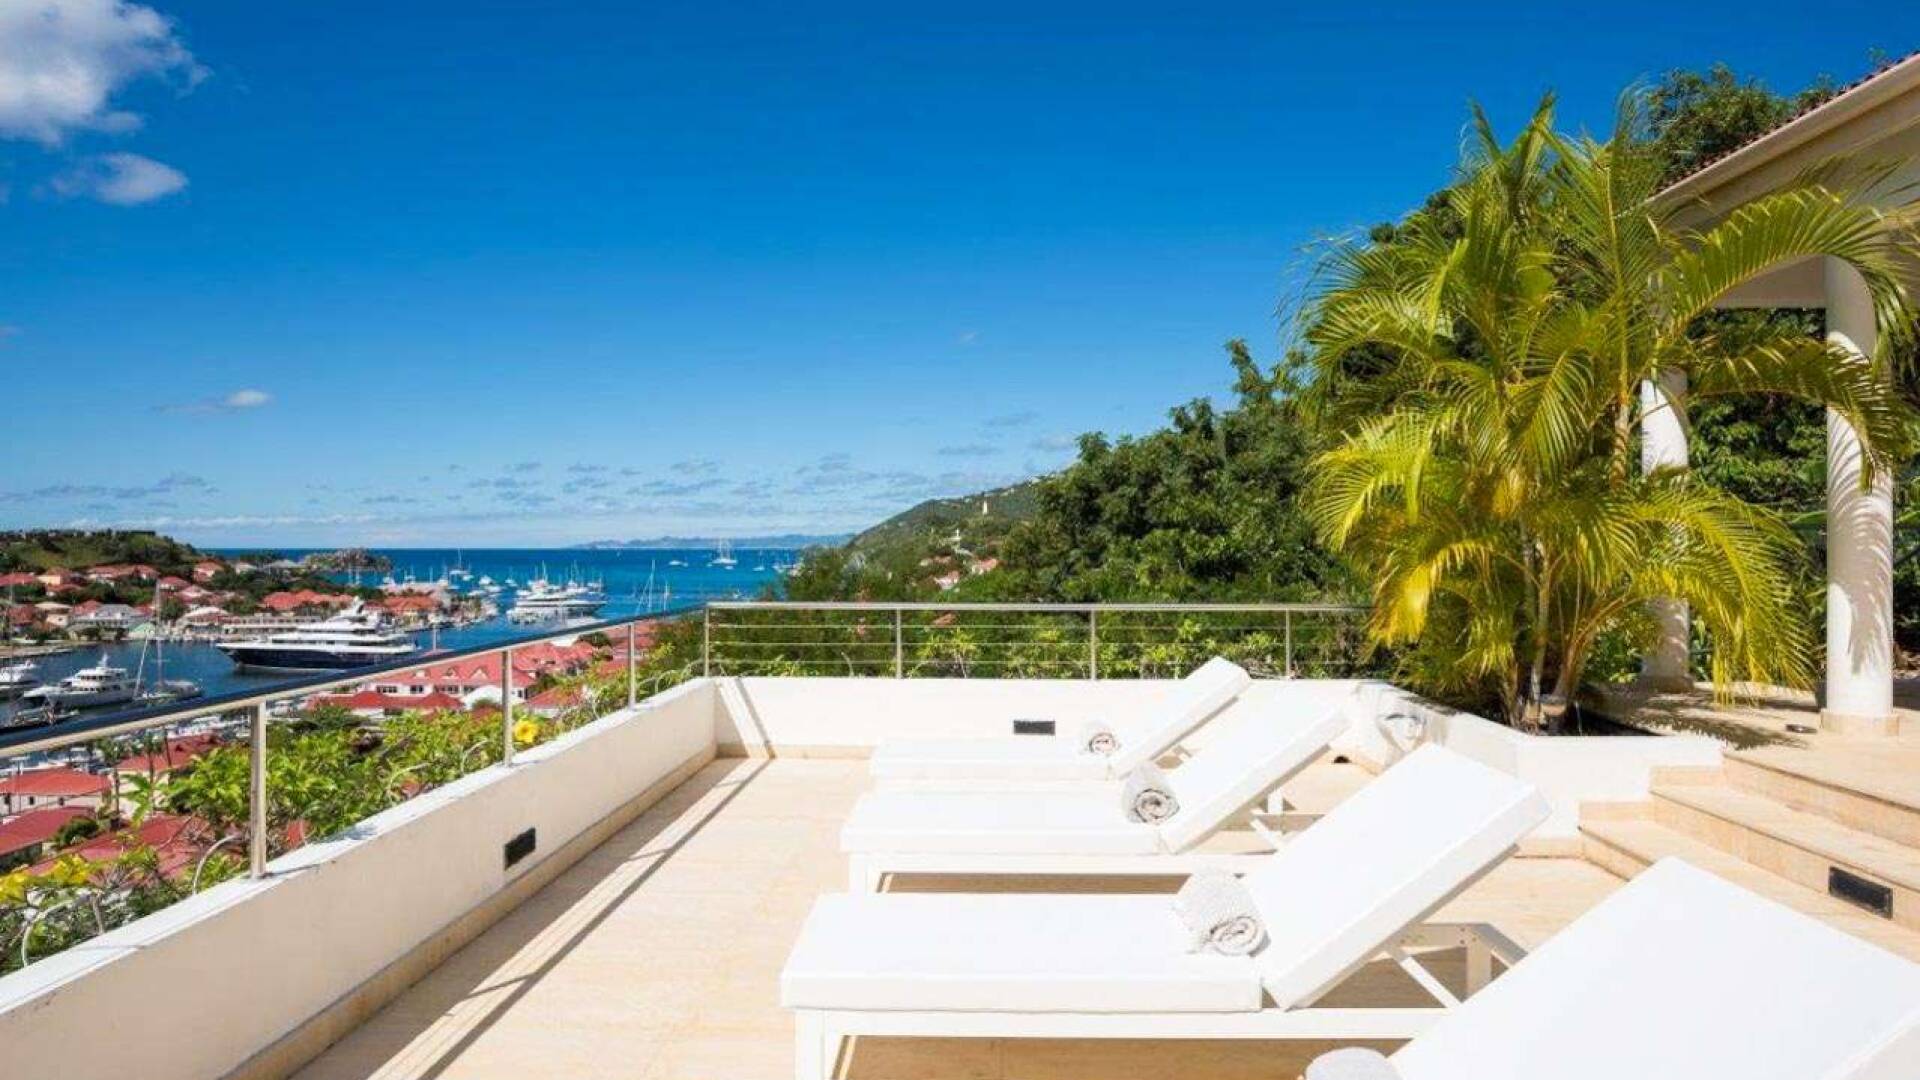 Terrace at WV PRE, Gustavia, St. Barthelemy